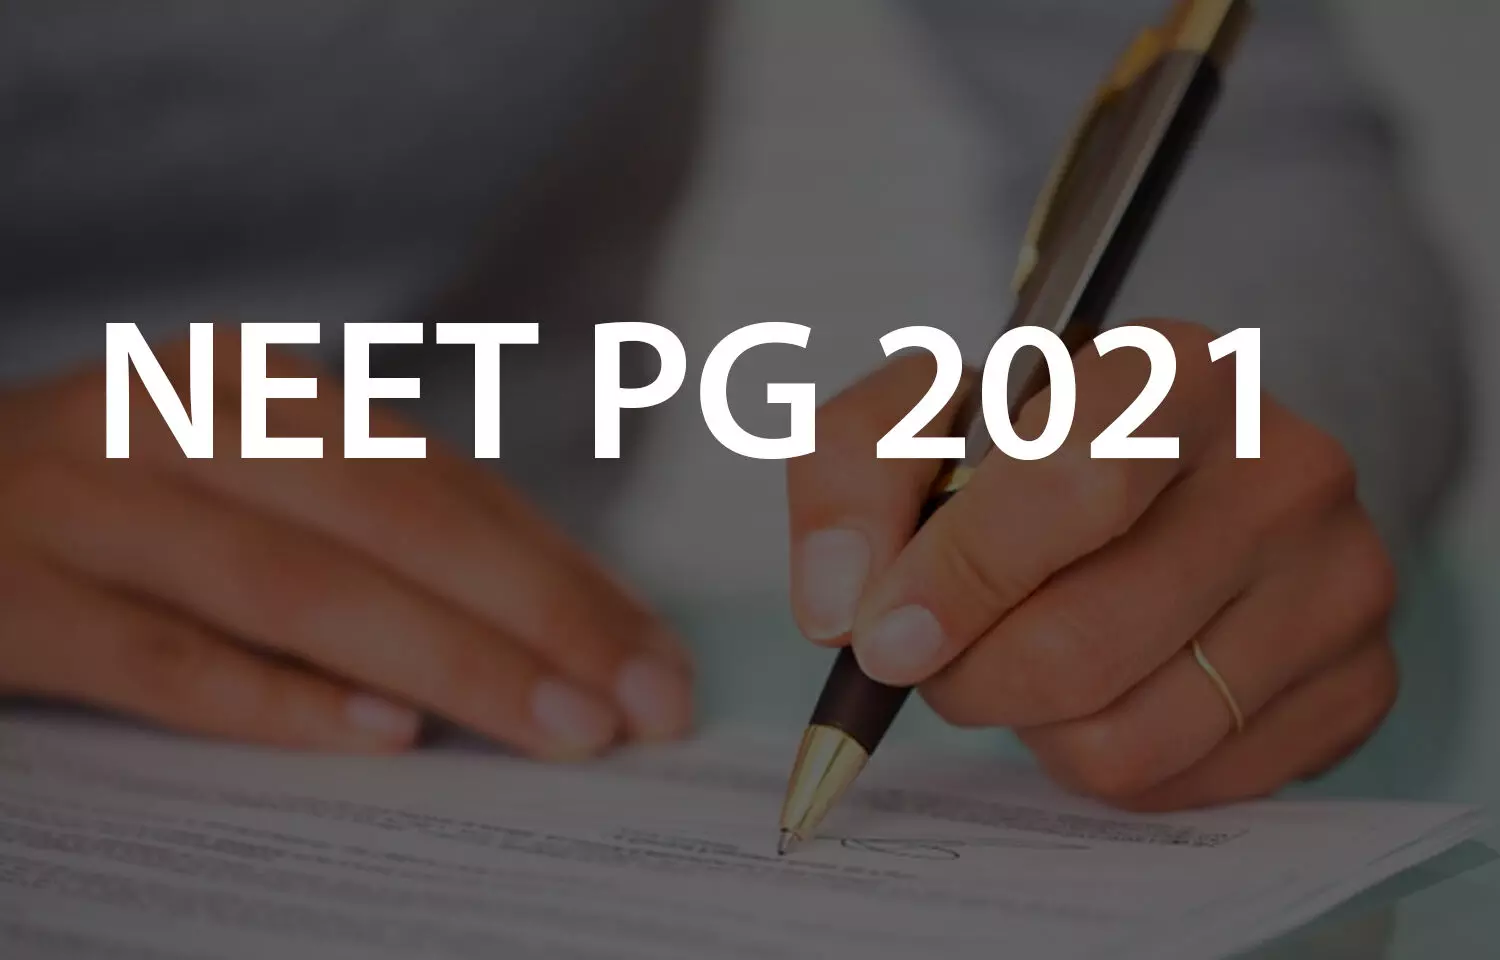 Candidates write NEET PG 2021 under tough weather conditions, rate questions as straightforward